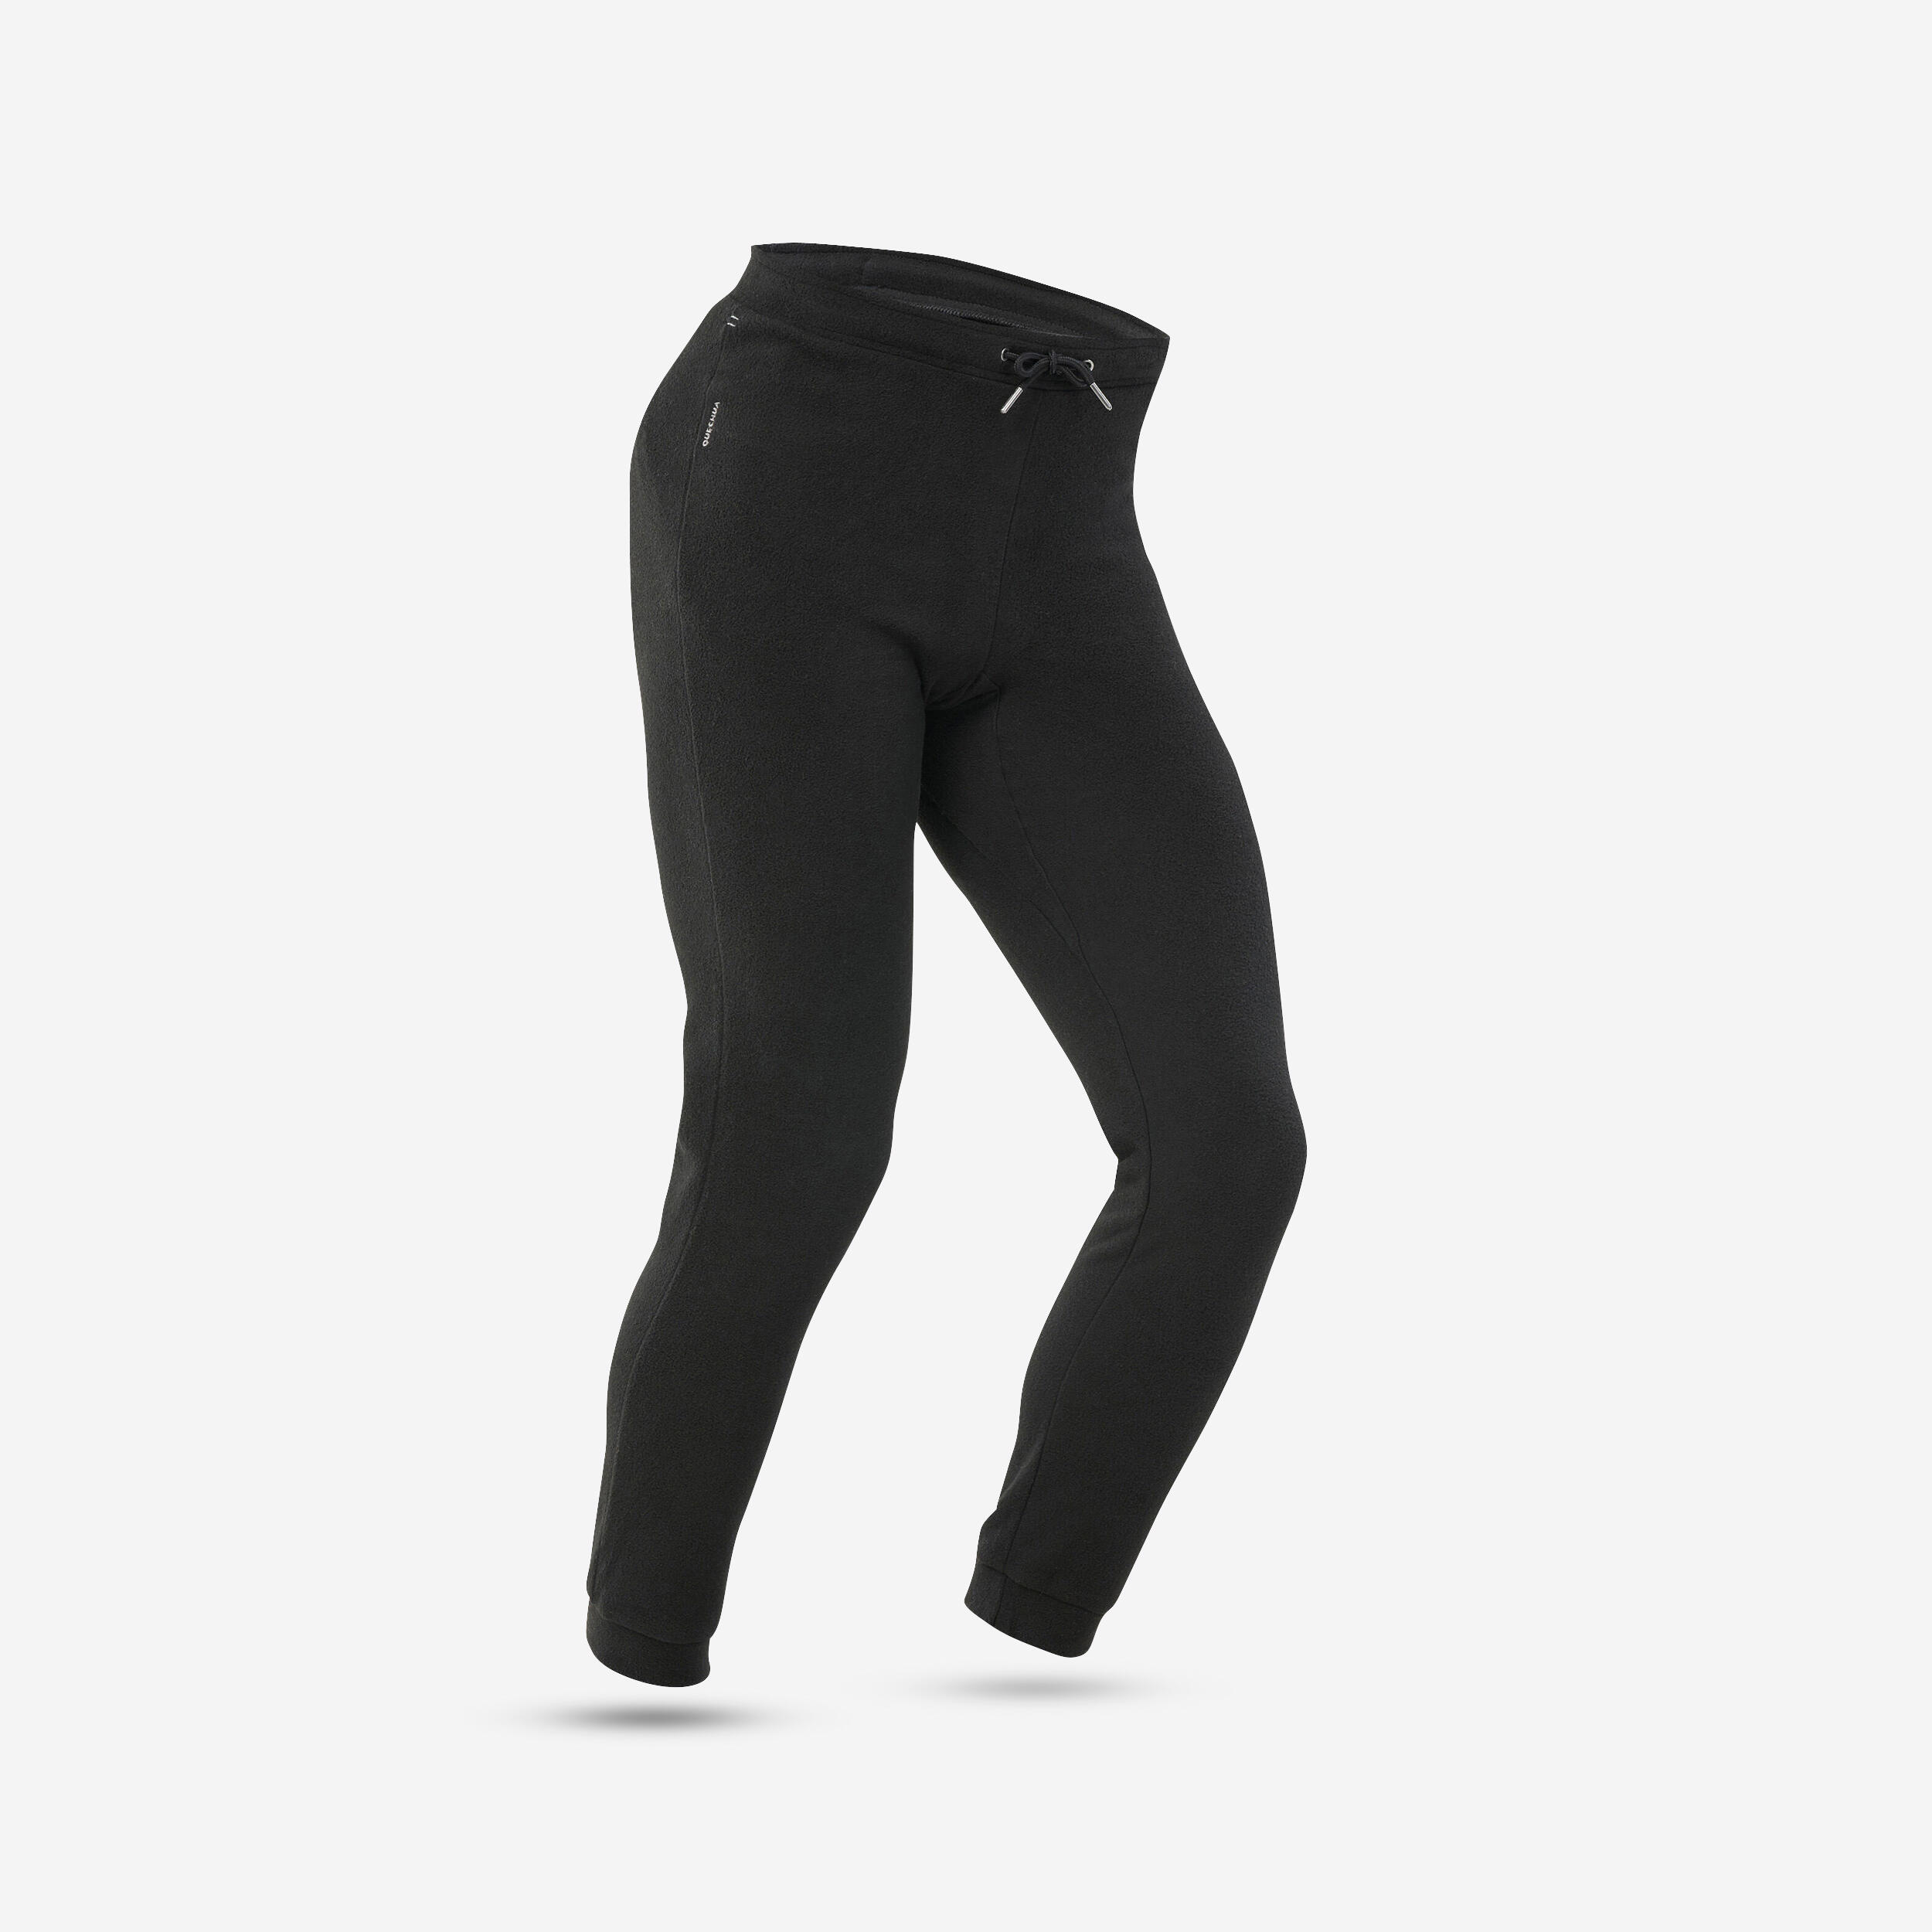 I Comfortably Hiked a Freezing Glacier in These $25 Fleece Leggings